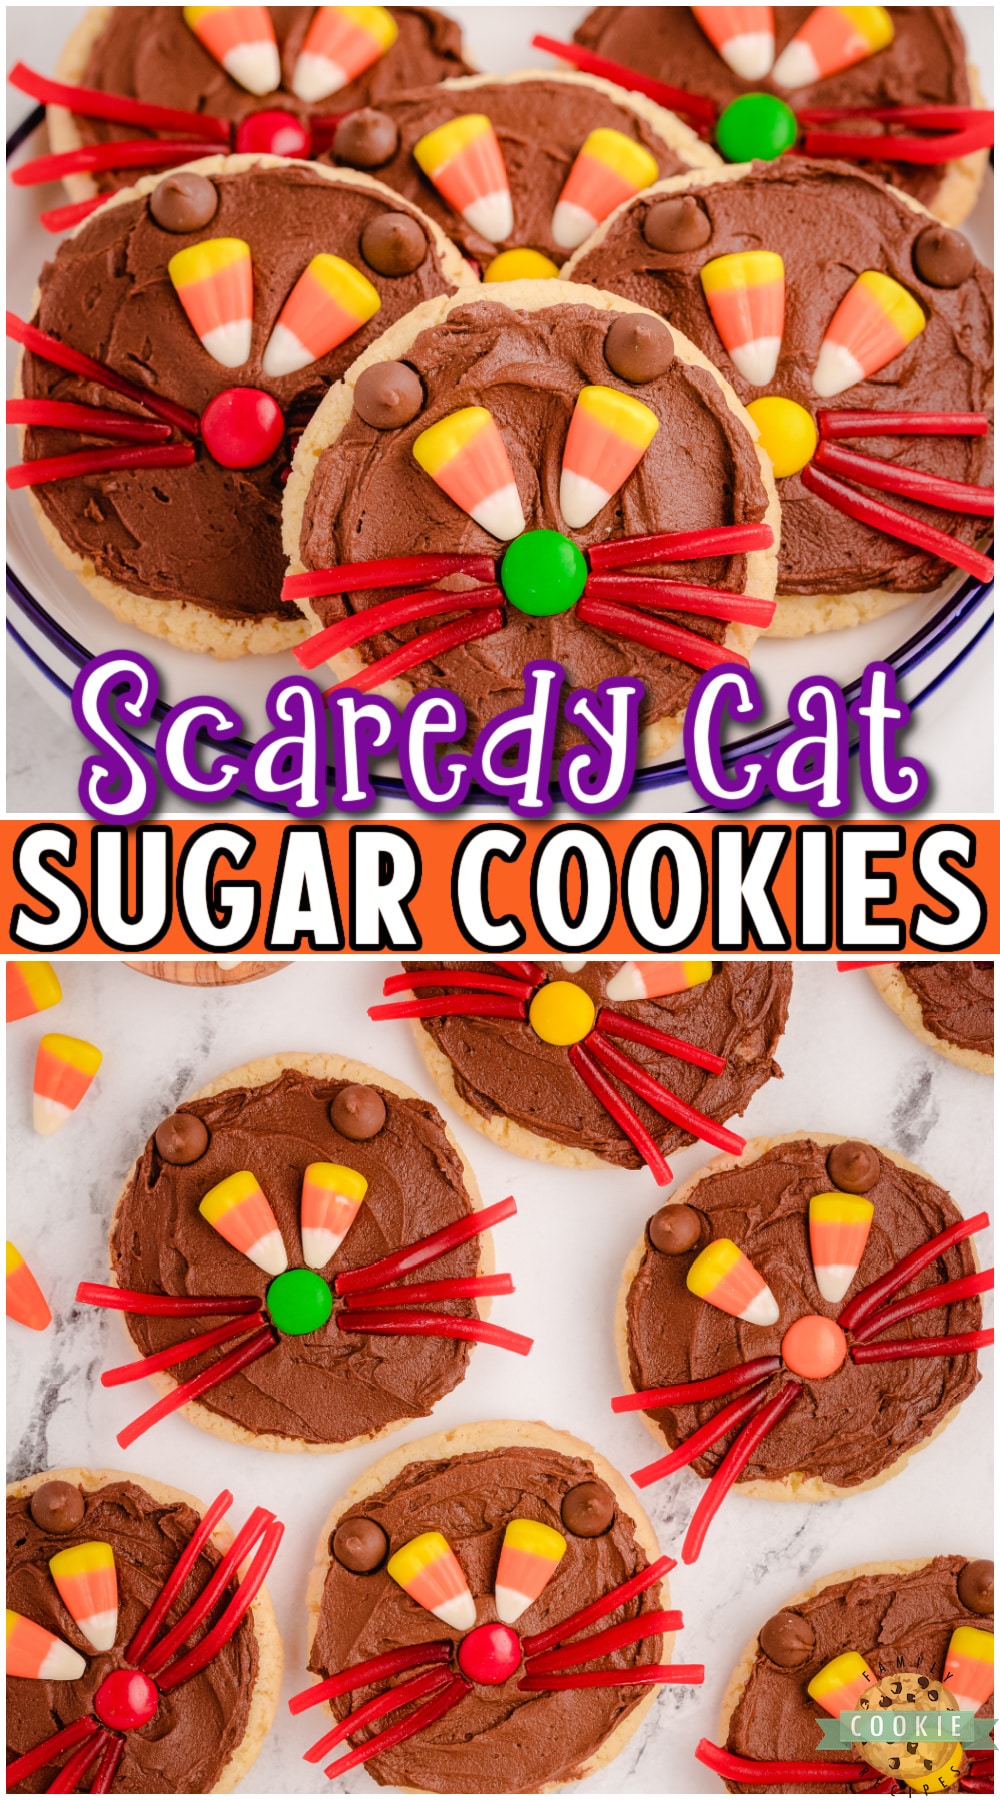 Halloween Cat Cookies are super cute & easy to make! Festive Scaredy Cat Halloween cookies made with a packaged cookie mix, frosting & candy!